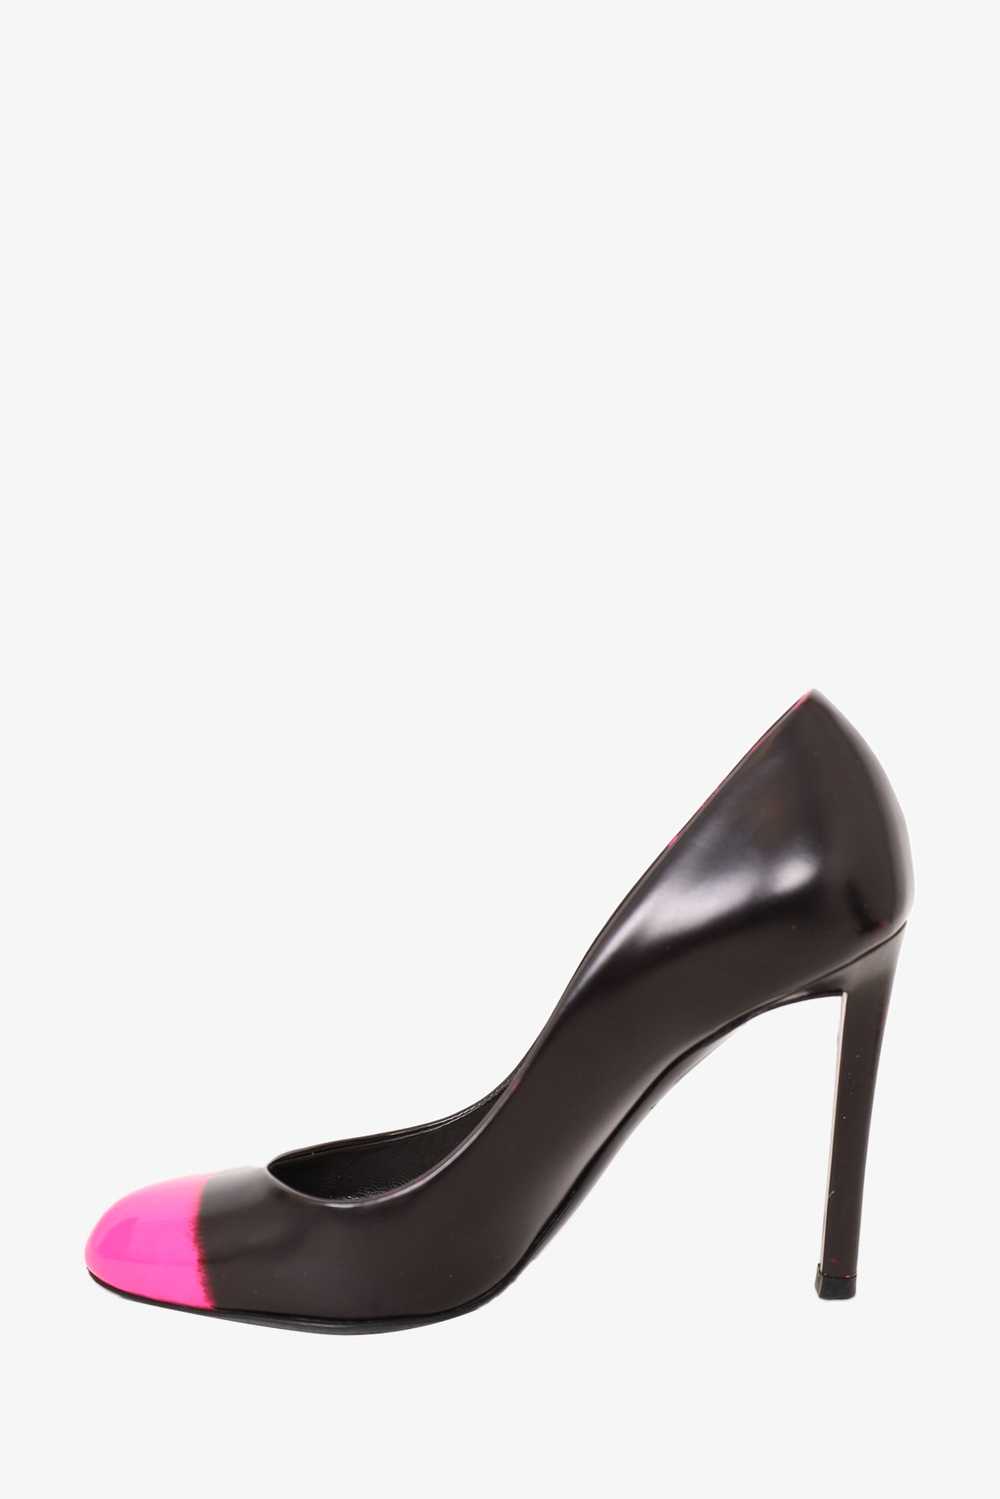 Christian Dior Black with Neon Pink Toe Leather P… - image 3